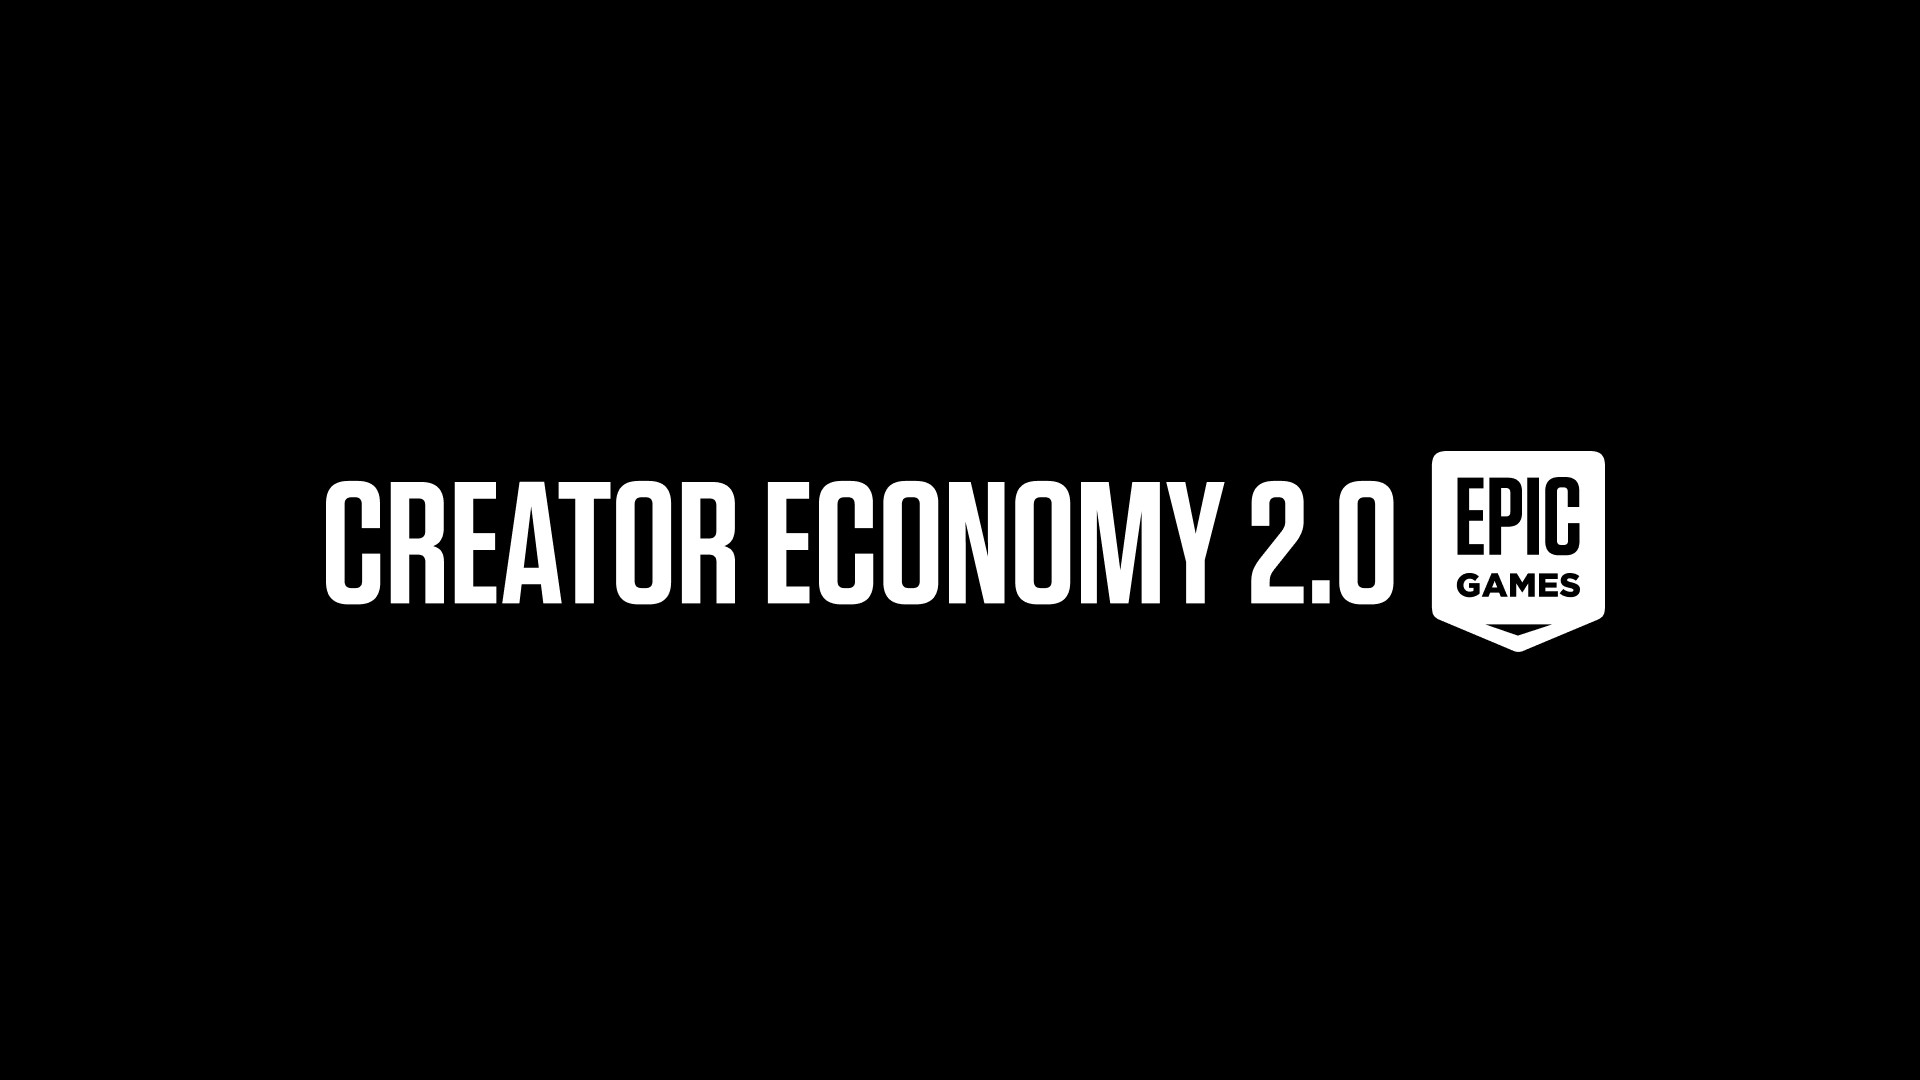 Creator Economy 2.0, the new payment system for Fortnite creators